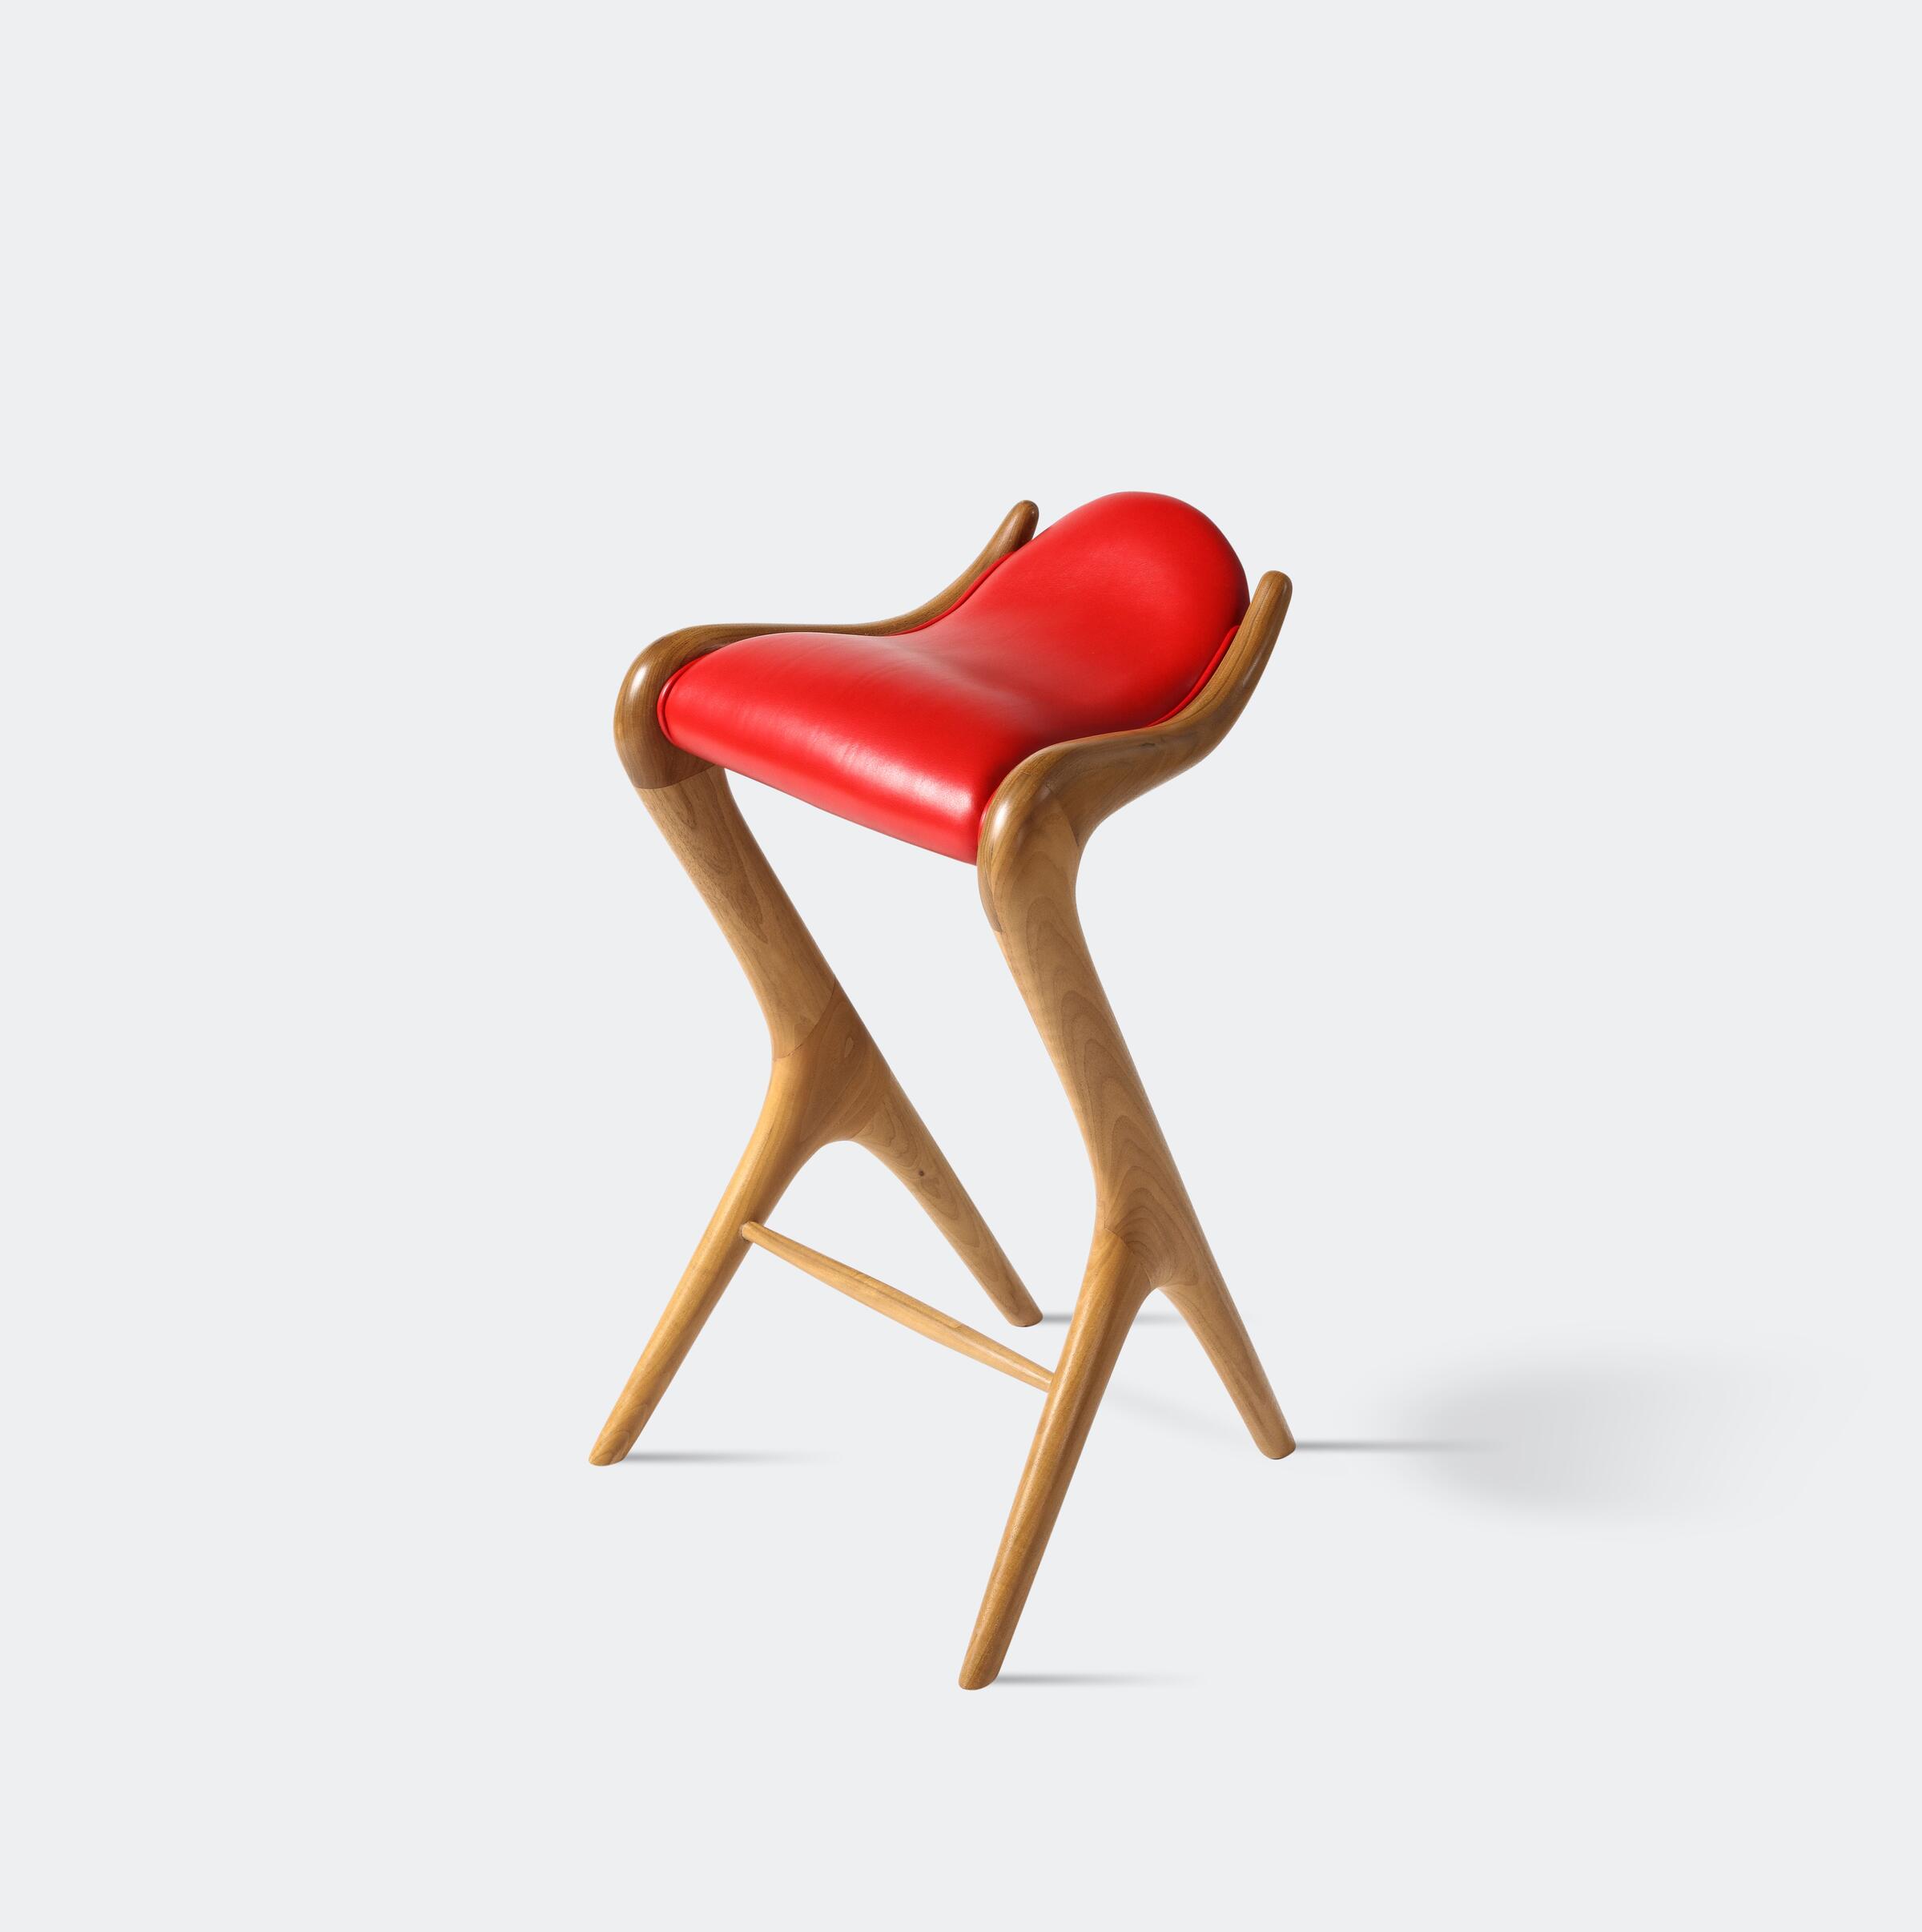 Sculpted Saddle Seat Barstool, Walnut Sand, Romeo: Red Lacquer